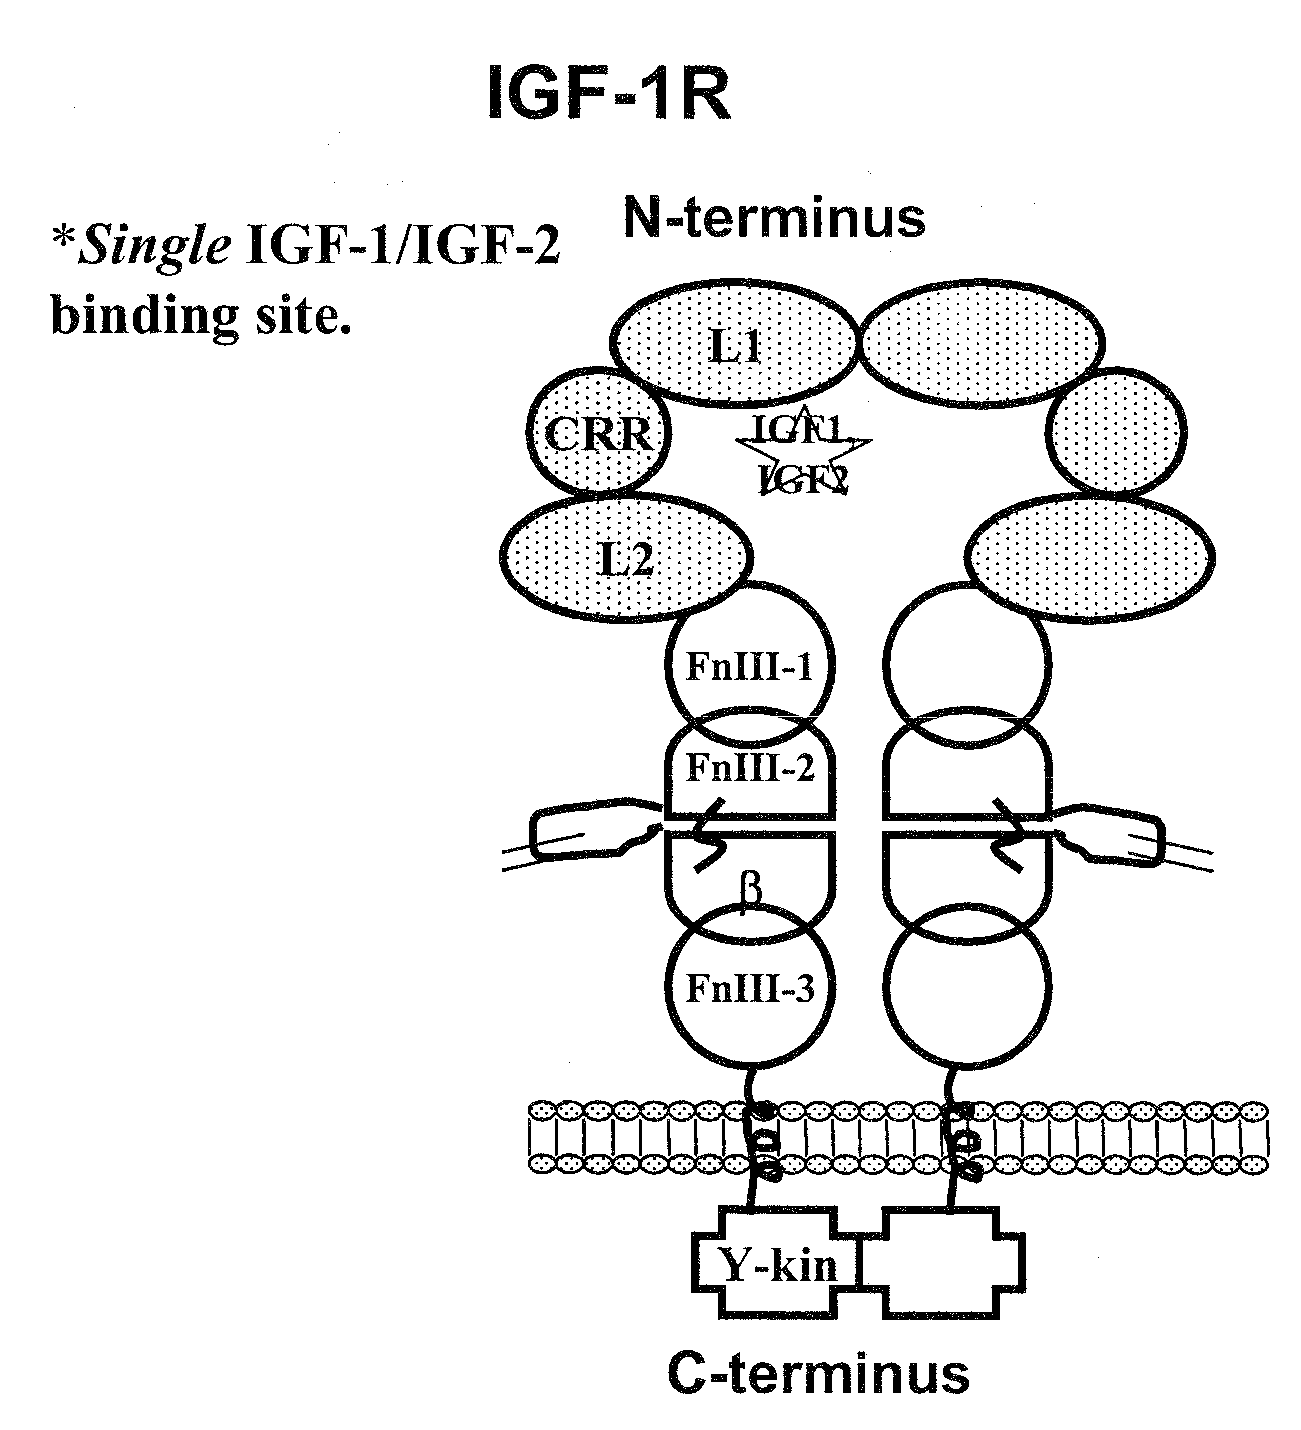 Compositions that bind multiple epitopes of igf-1r